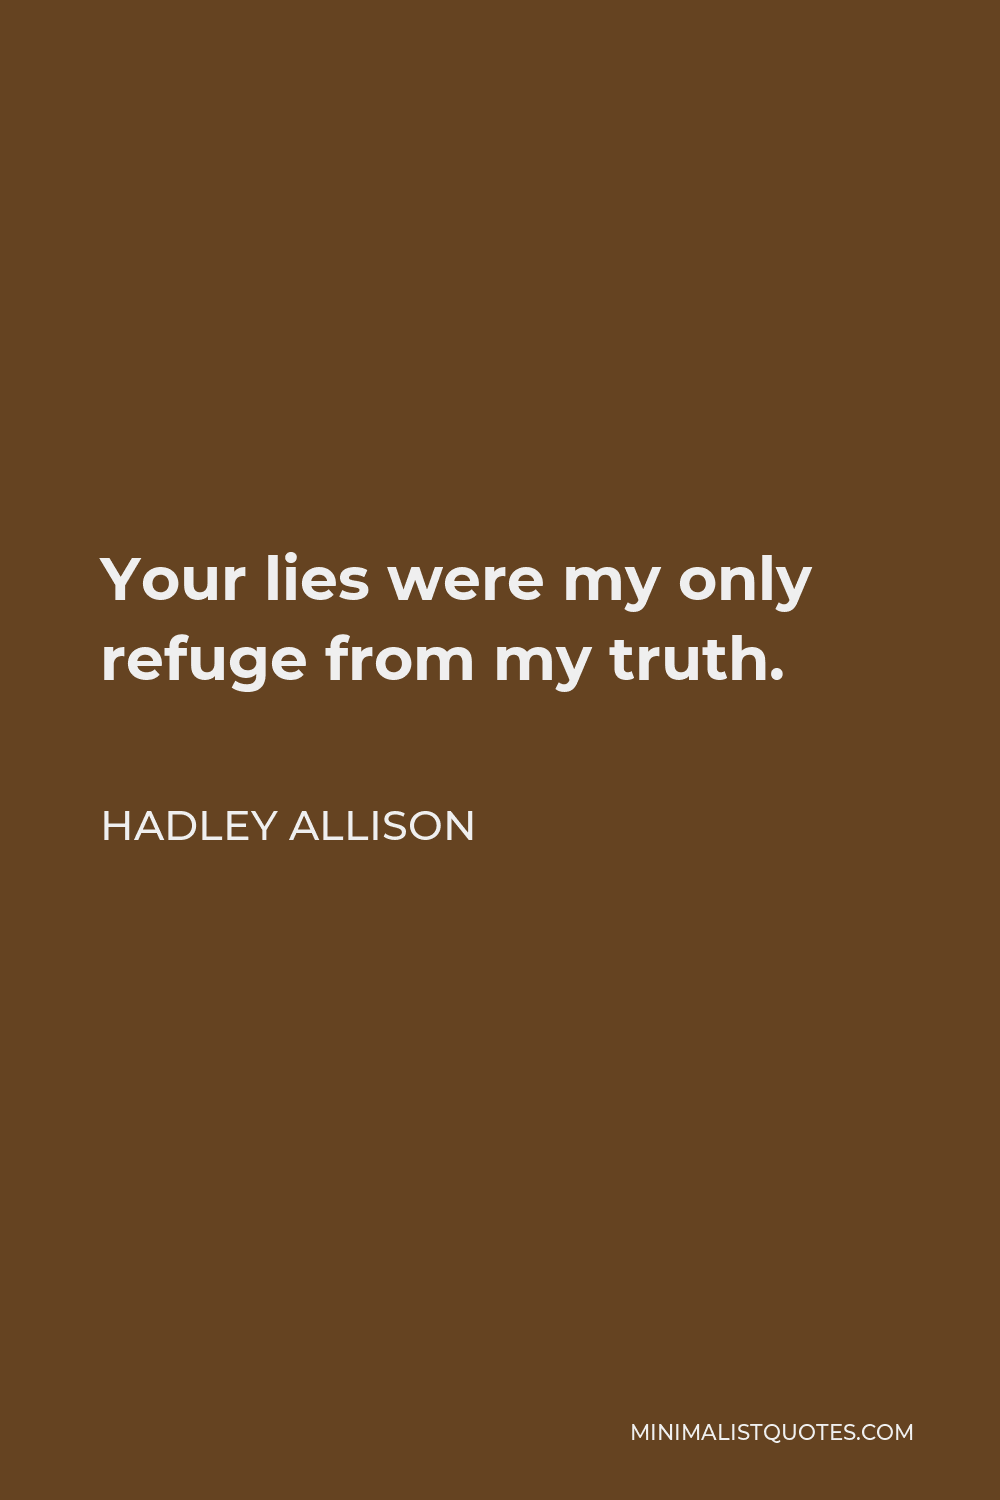 Hadley Allison Quote - Your lies were my only refuge from my truth.